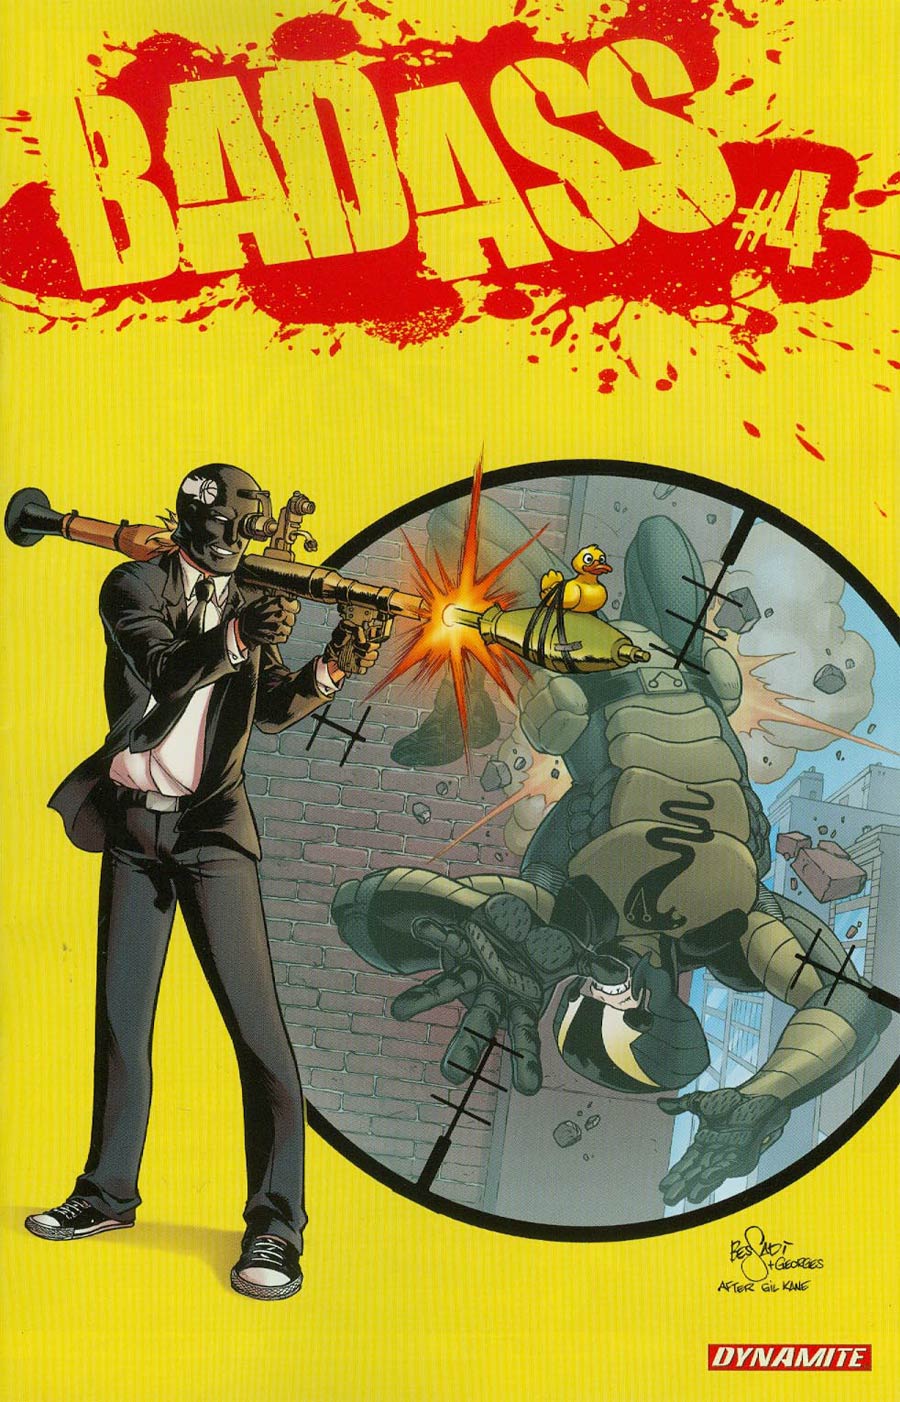 Bad Ass Vol 1 #4 Cover A 1st Ptg Bruno Bessadi Cover